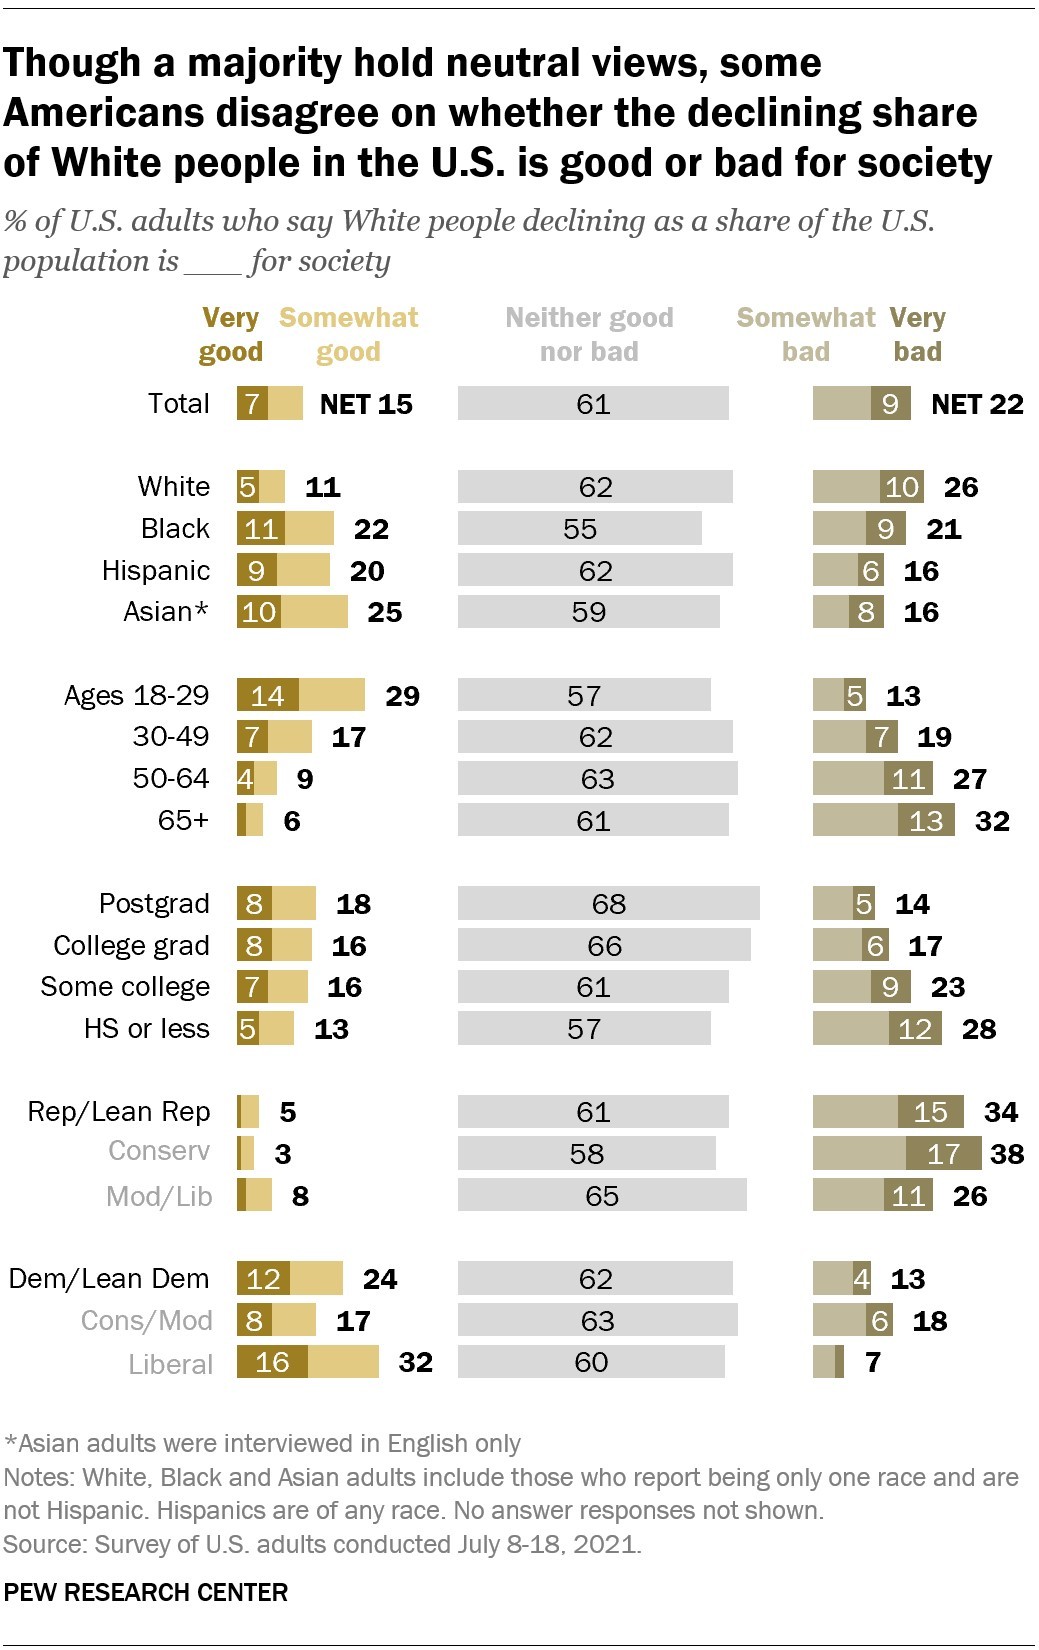 A majority of U.S. adults say the decreasing share of Americans who identify their race as White is neither good nor bad for society, according to a recent survey.
About six-in-ten adults (61%) say the declining proportion of Americans who identify...